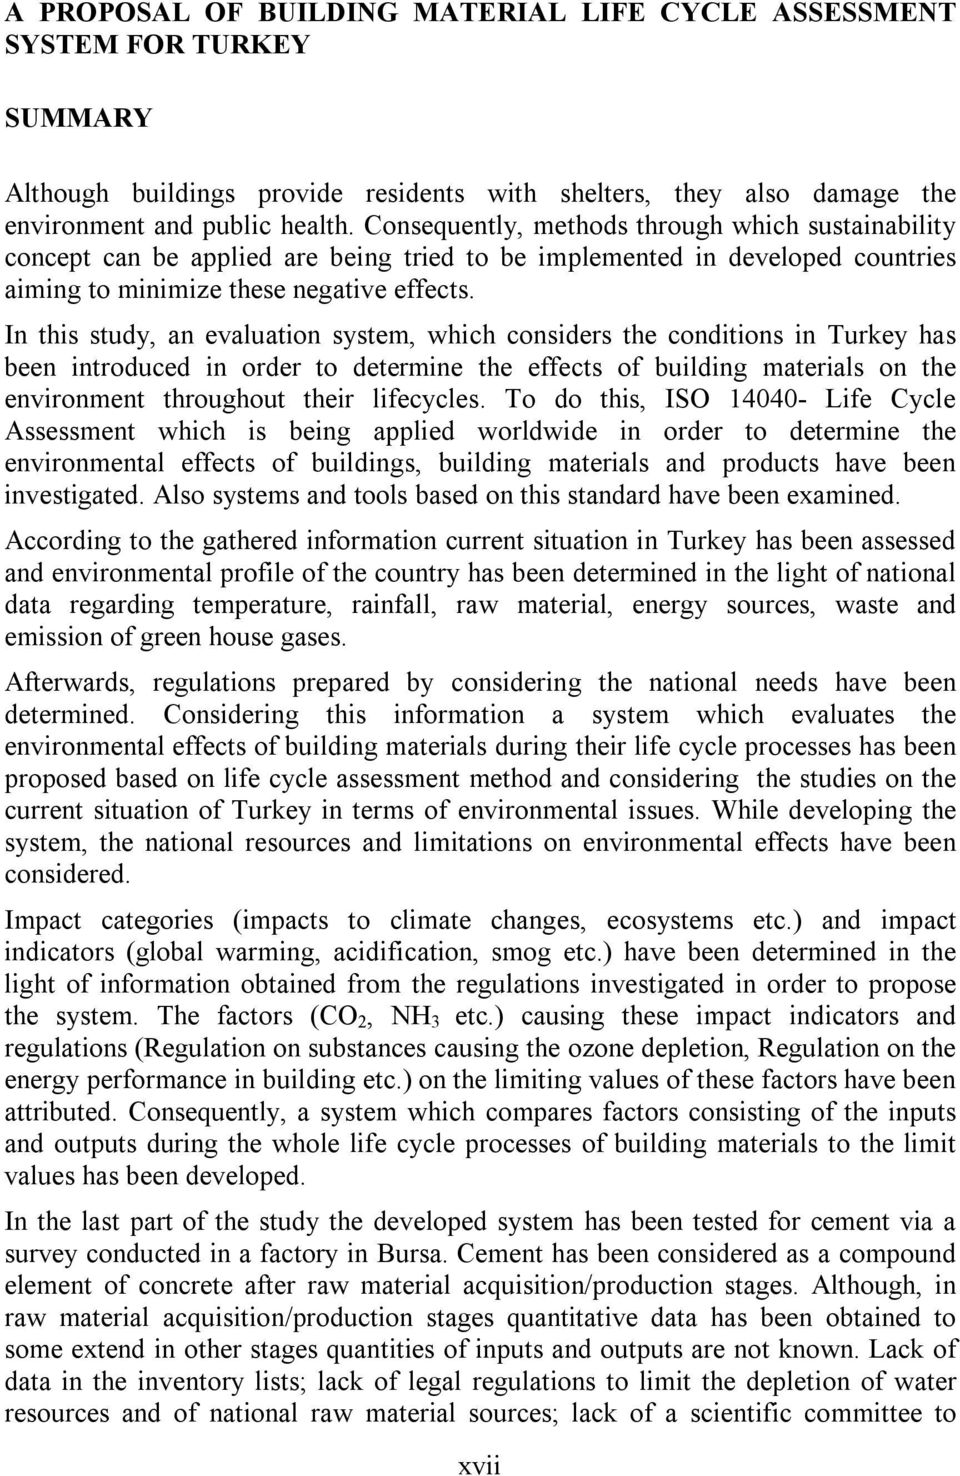 In this study, an evaluation system, which considers the conditions in Turkey has been introduced in order to determine the effects of building materials on the environment throughout their